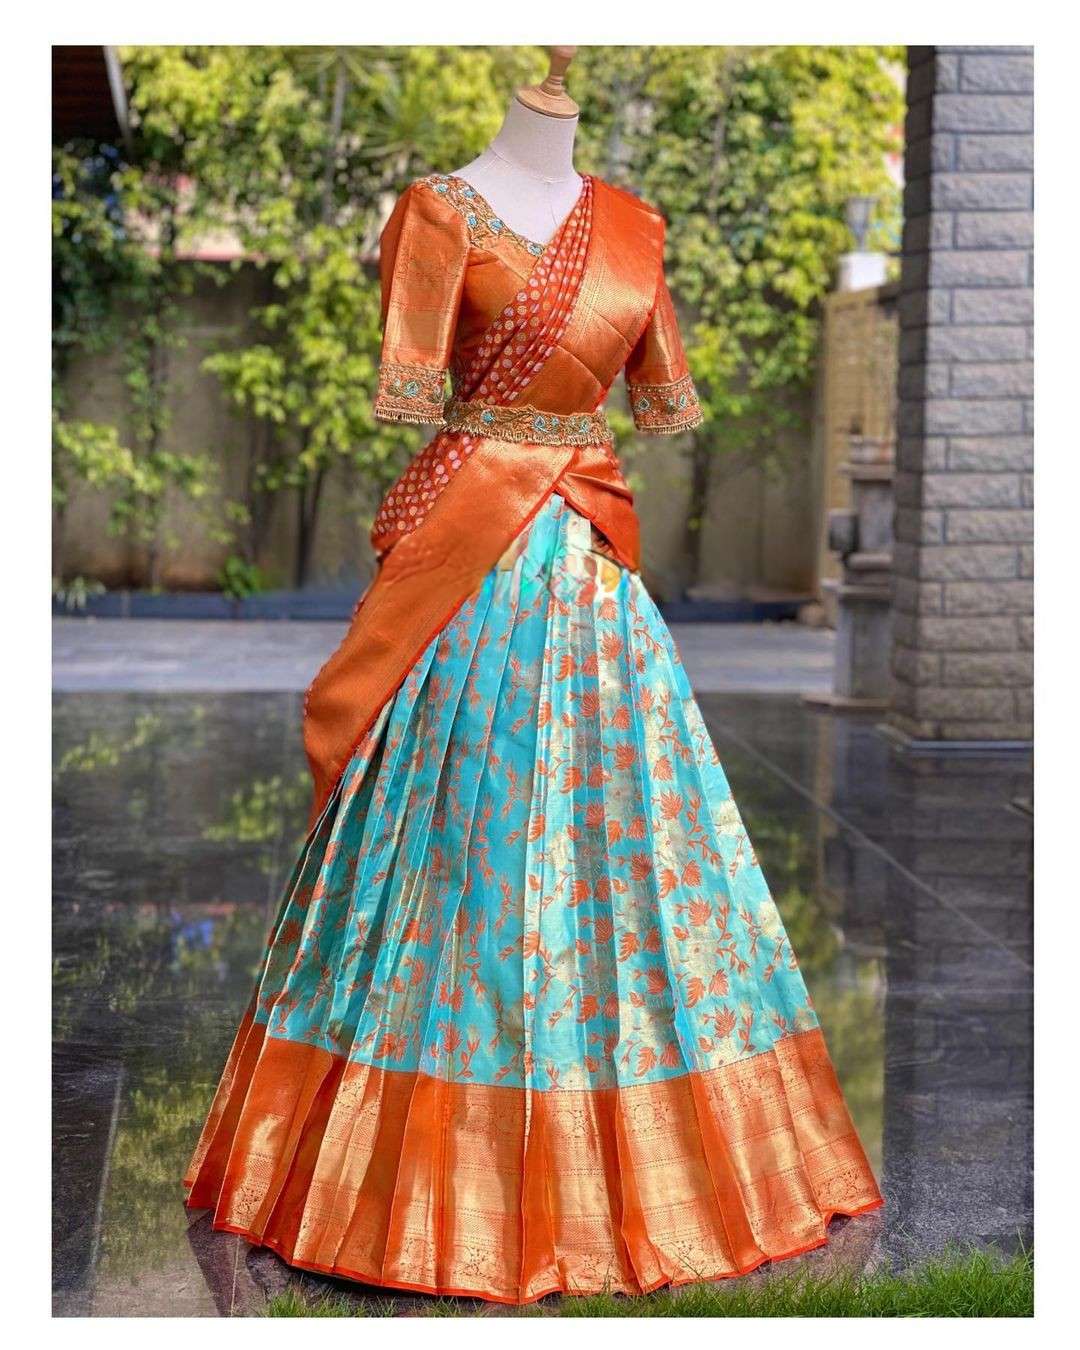 Buy Lehenga Choli Online at best prices from Shree Designer Saree Catch our  latest Collection of Indian Lehengas, Bridal Lehenga Choli, Designer  Lehenga Choli, Wedding Lehenga Cholis other lehenga designs for Women